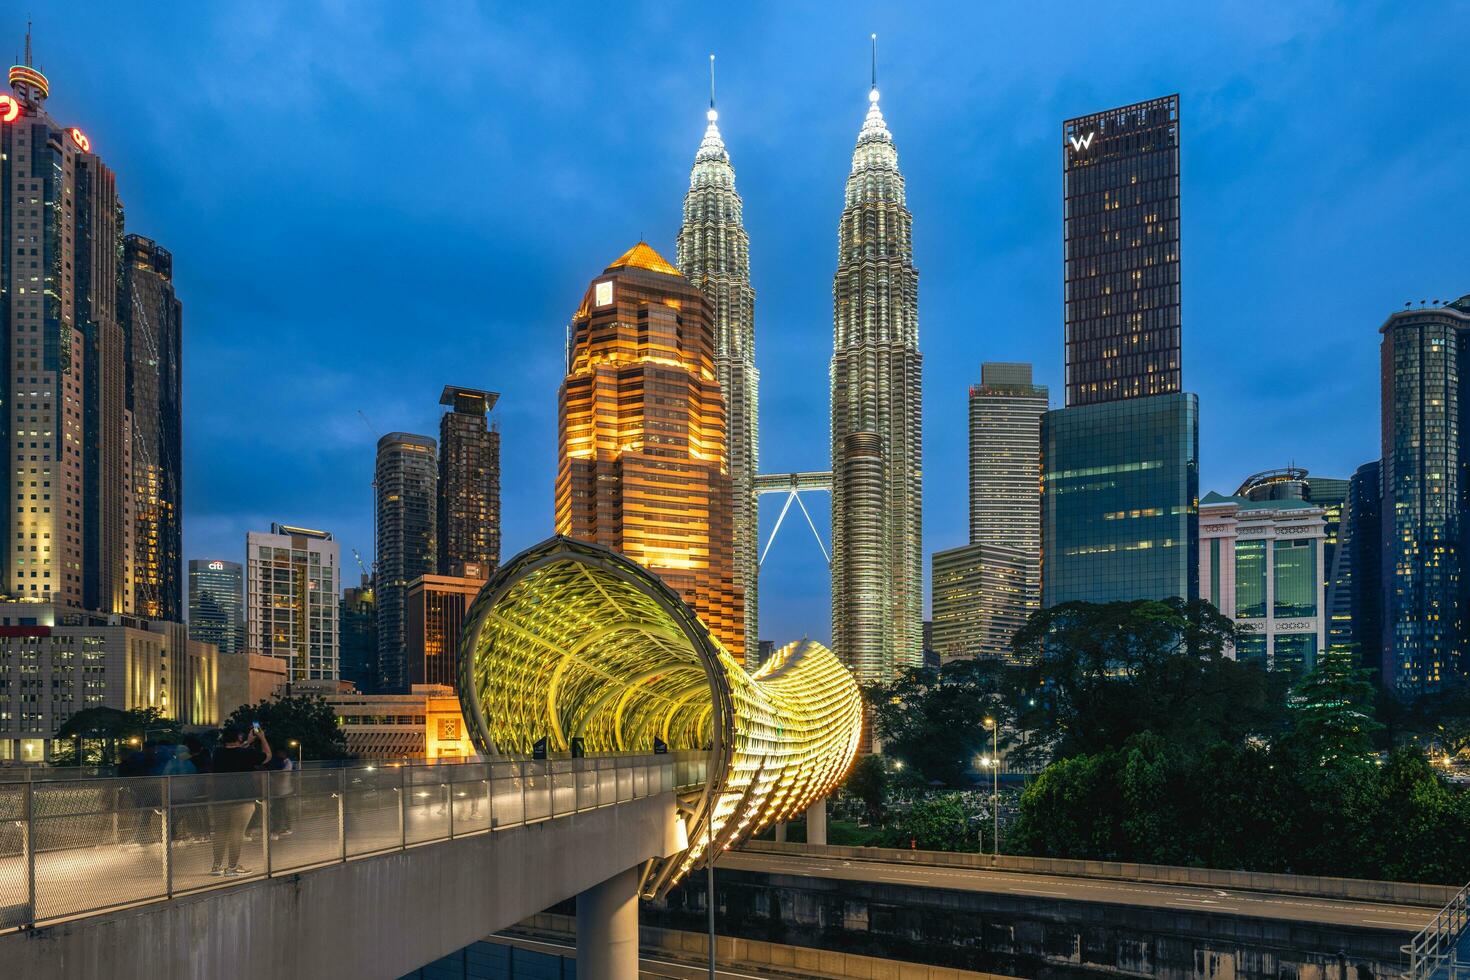 Saloma Link, Pintasan Saloma, a 69 meters combined pedestrian and bicyclist bridge across the Klang River in Kuala Lumpur, Malaysia. The architecture is inspired by the sireh junjung photo